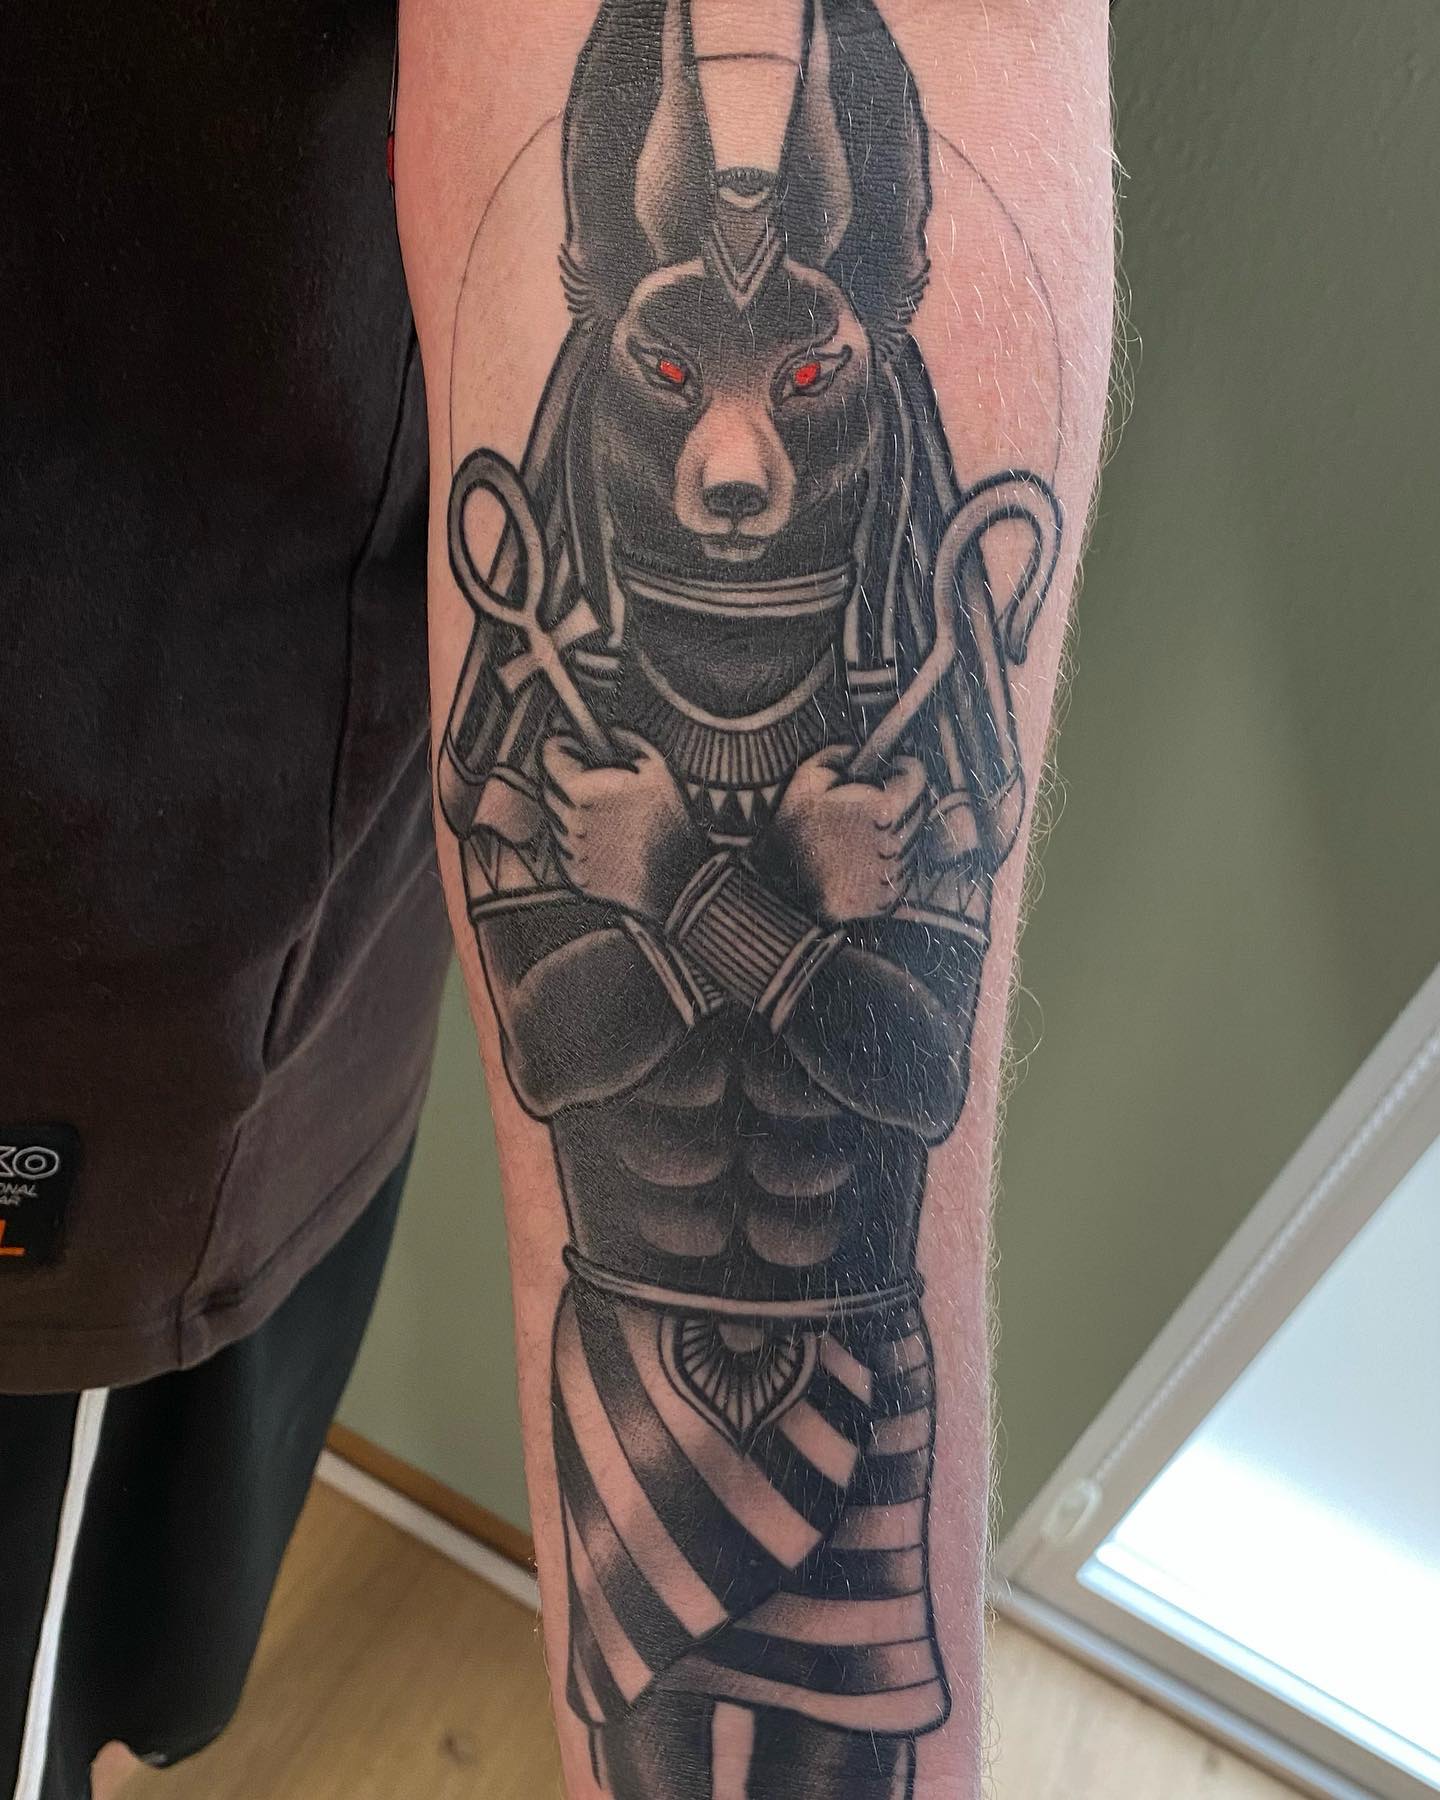 A well-designed Anubis tattoo on forearm is all you need to shine.